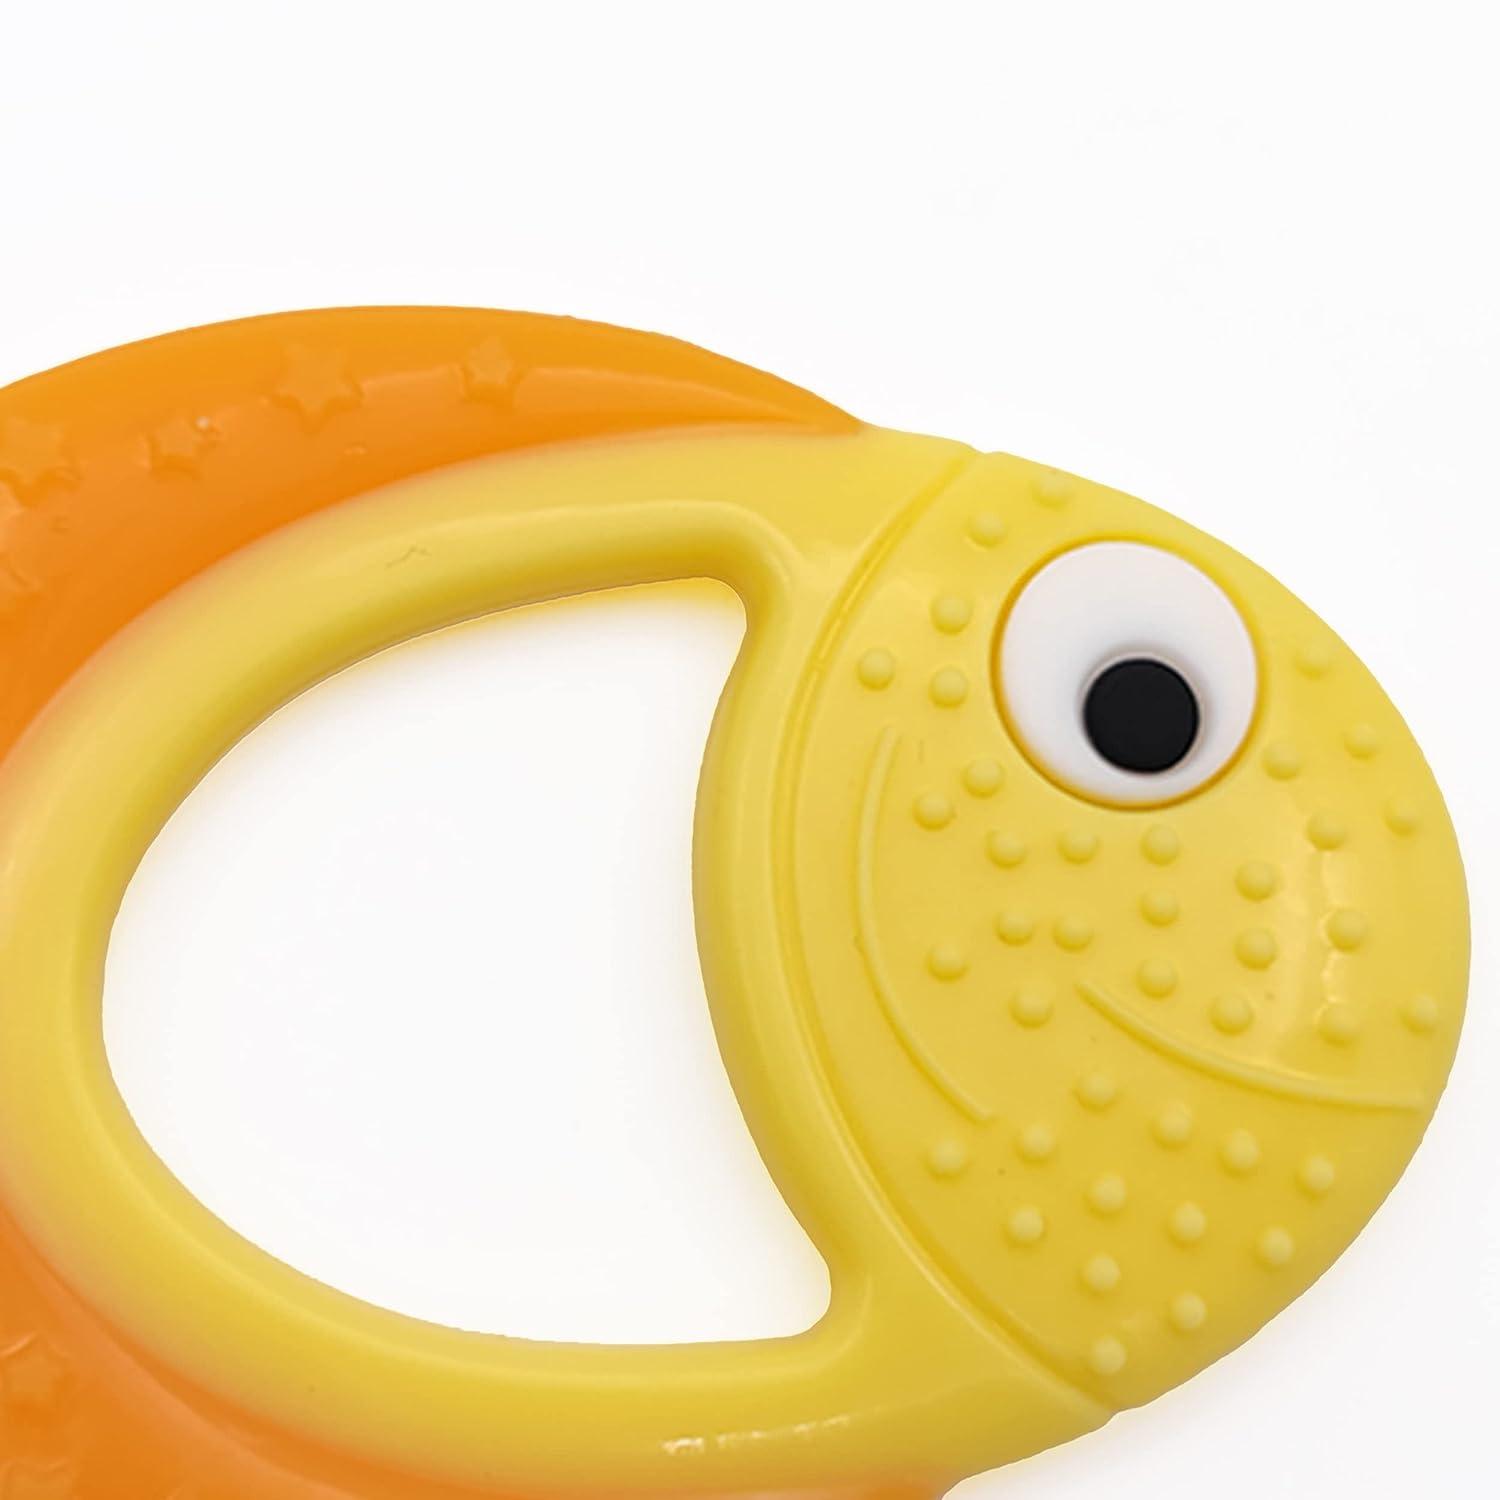 Fish Baby Teething Toys Teether Ring Food Grade Silicone Soft-Textured  Infant Toddler Toys for Teething Relief & Brain Development for Babies 0-6  Months 6-12 Months Baby Registry Newborn Essentials Golden Fish